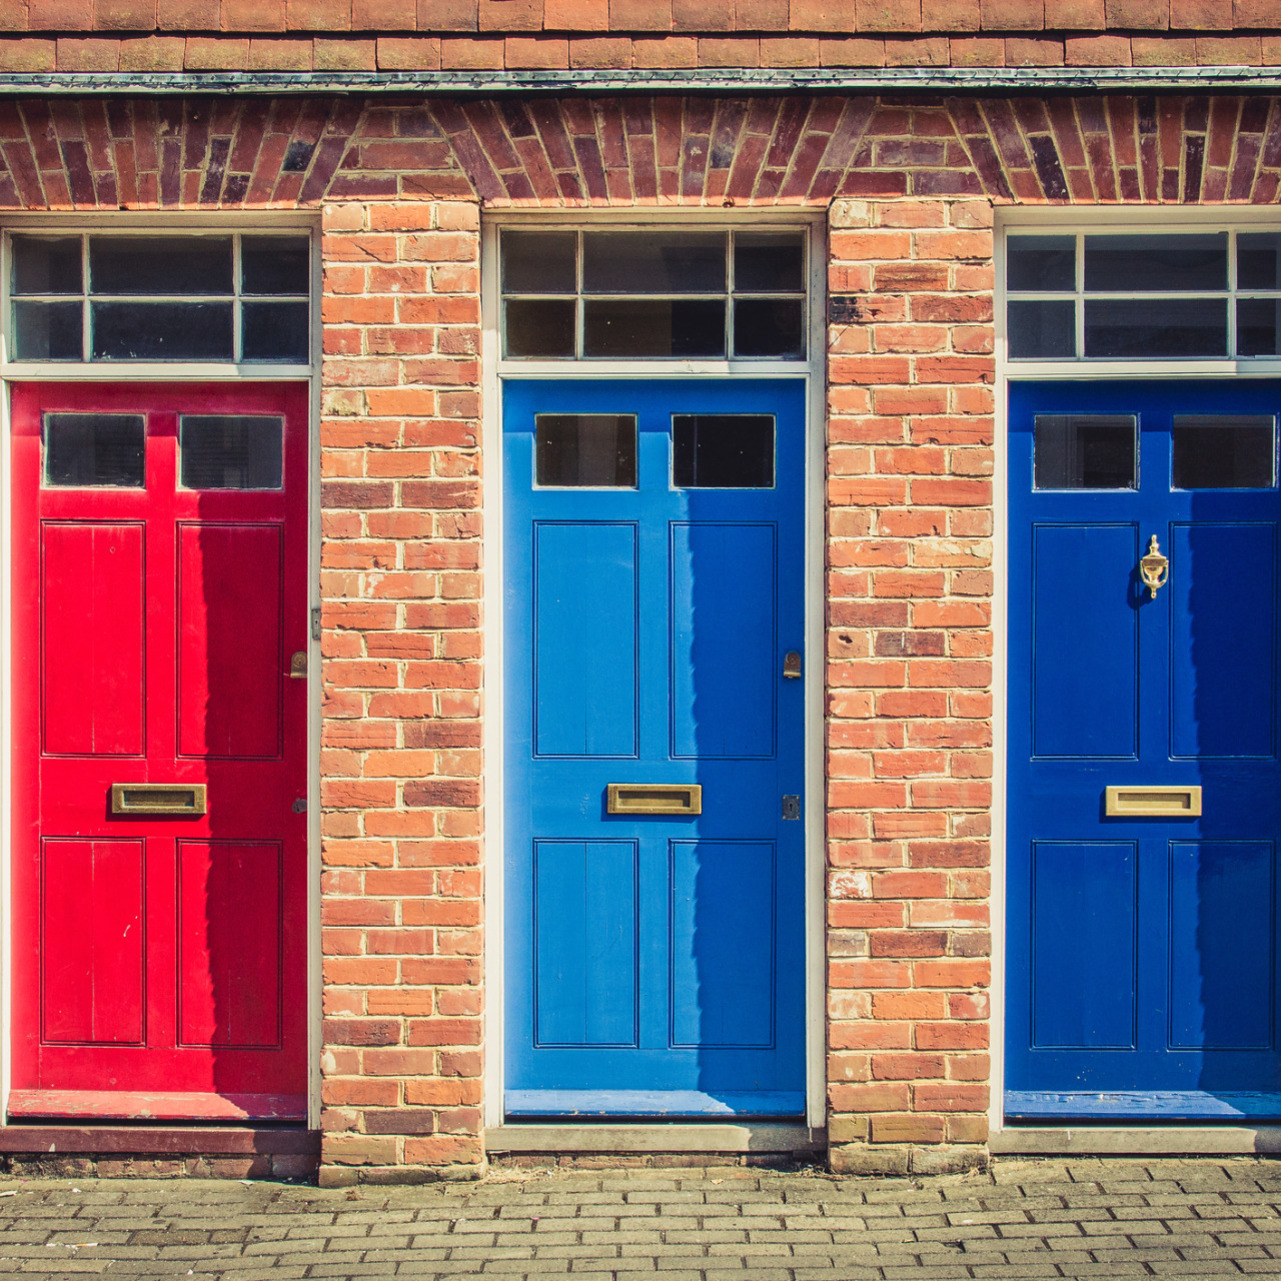 Three symmetrical doors painted in different colours: red, light blue and darker blue.